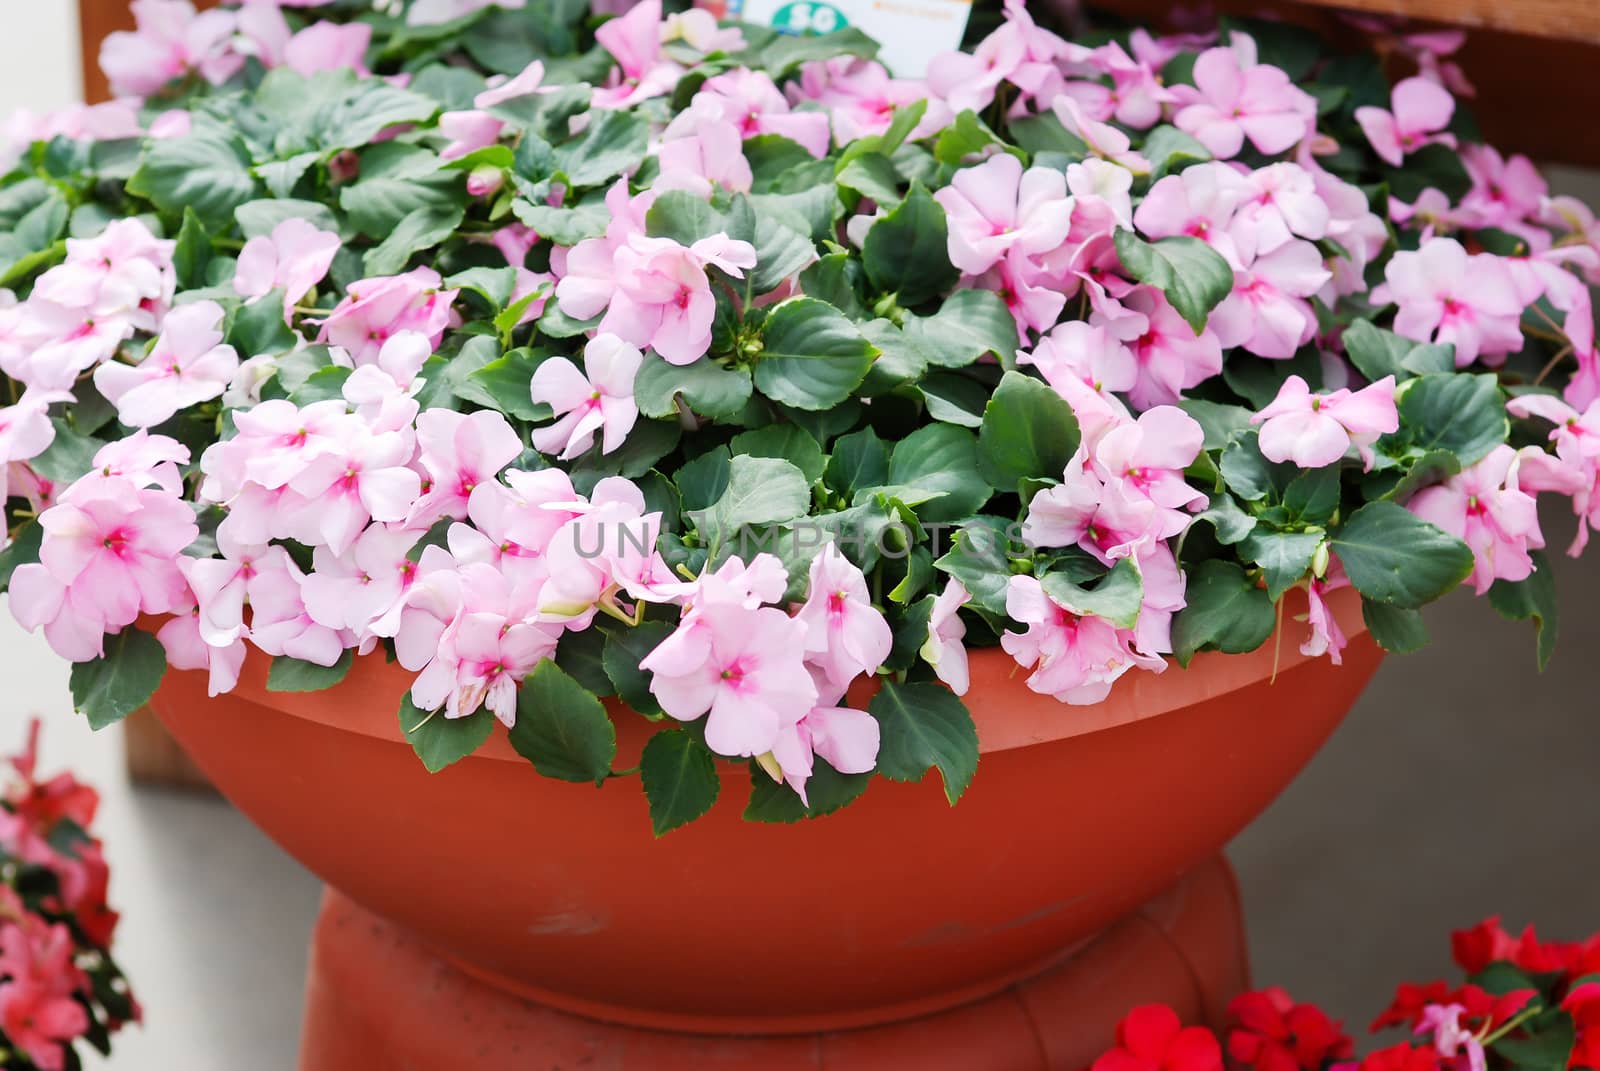 pink impatiens in potted, scientific name Impatiens walleriana f by yuiyuize